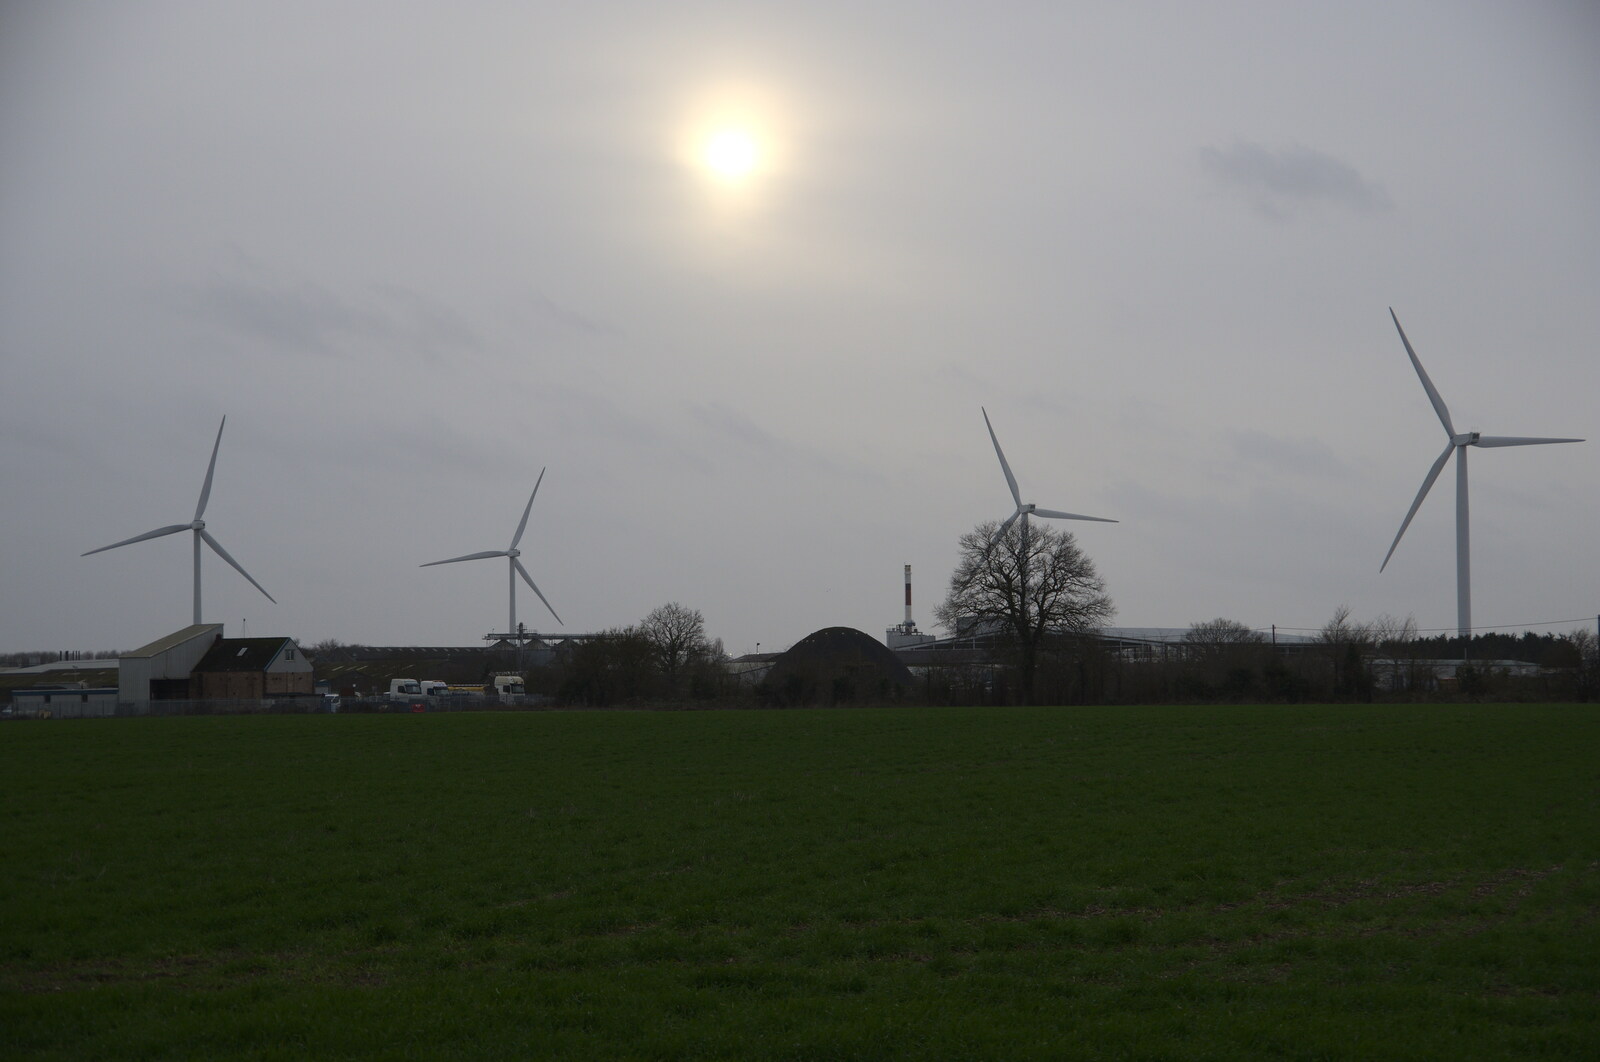 Winter Walks around Brome and Hoxne, Suffolk - 2nd January 2023: The wind turbines of Eye airfield